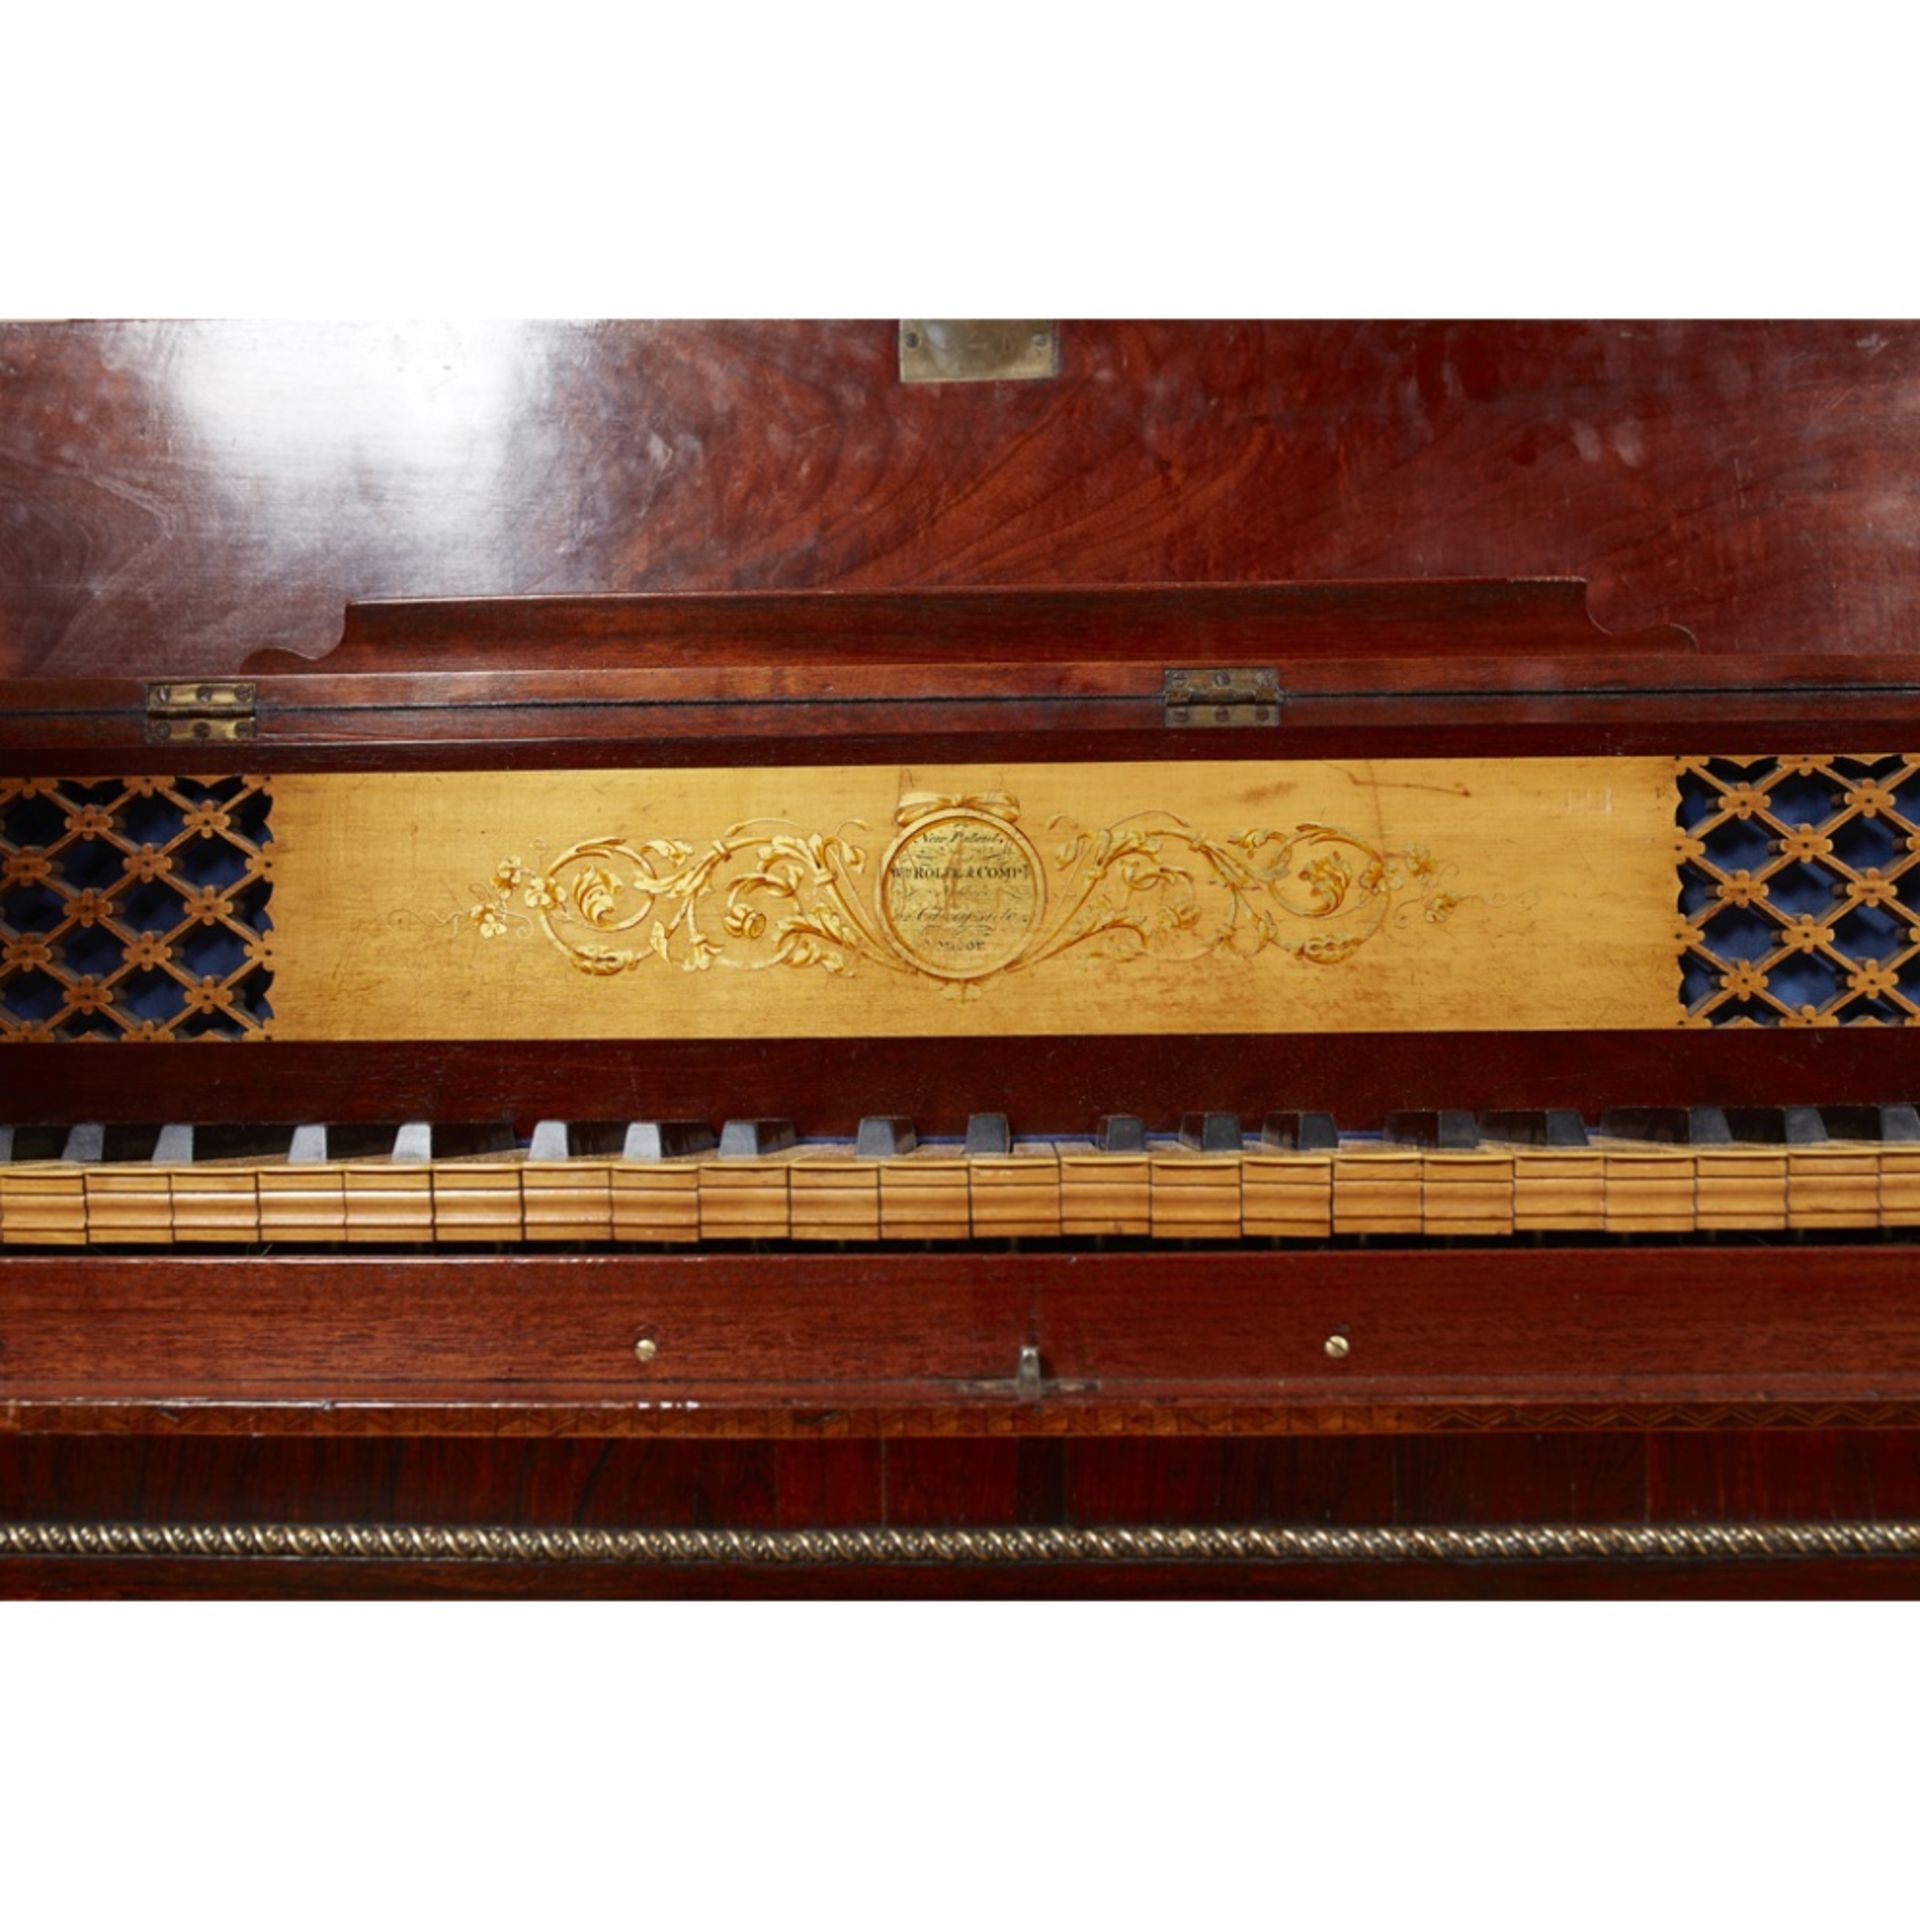 WILLIAM ROLFE & COMPANY, LONDON REGENCY MAHOGANY AND ROSEWOOD SQUARE PIANO, EARLY 19TH CENTURY the - Image 2 of 3